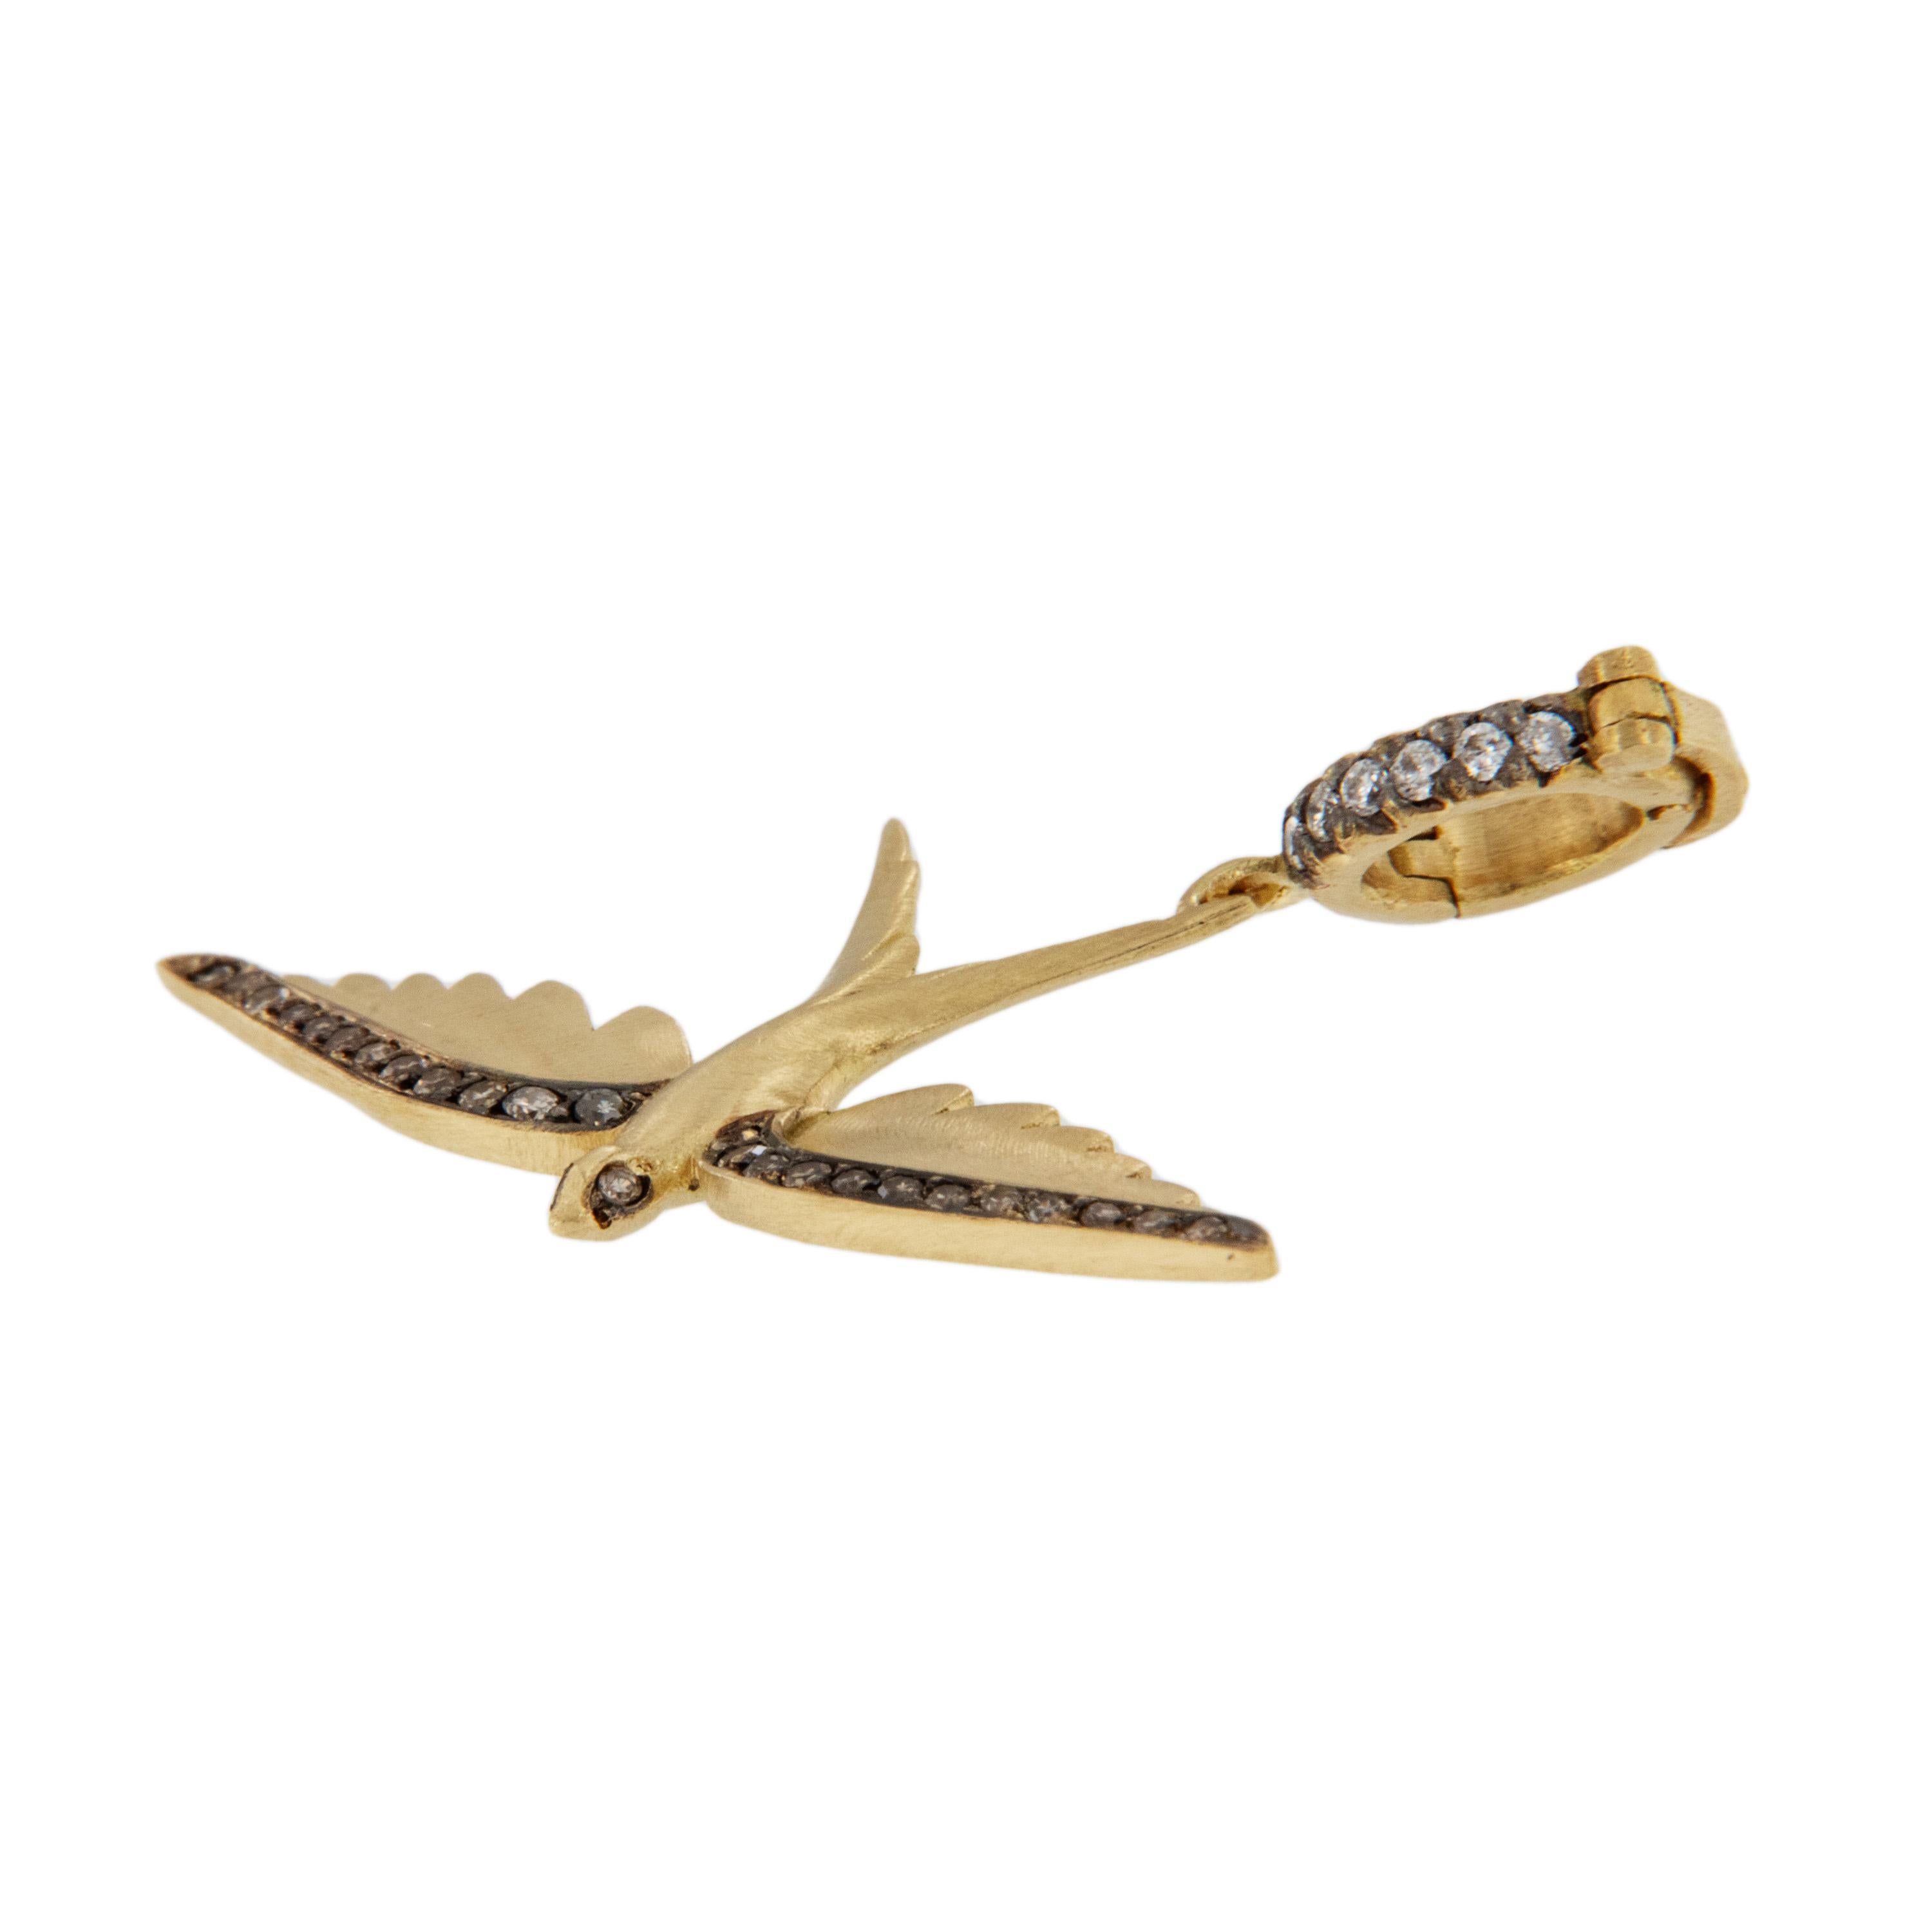 Crafted in rich 18 karat yellow gold this elegant swallowtail bird is edged with 0.11 Cttw Fancy Brown diamonds accented with black rhodium for a striking look! White diamonds accent the bail which is hinged making it easy to wear with your favorite